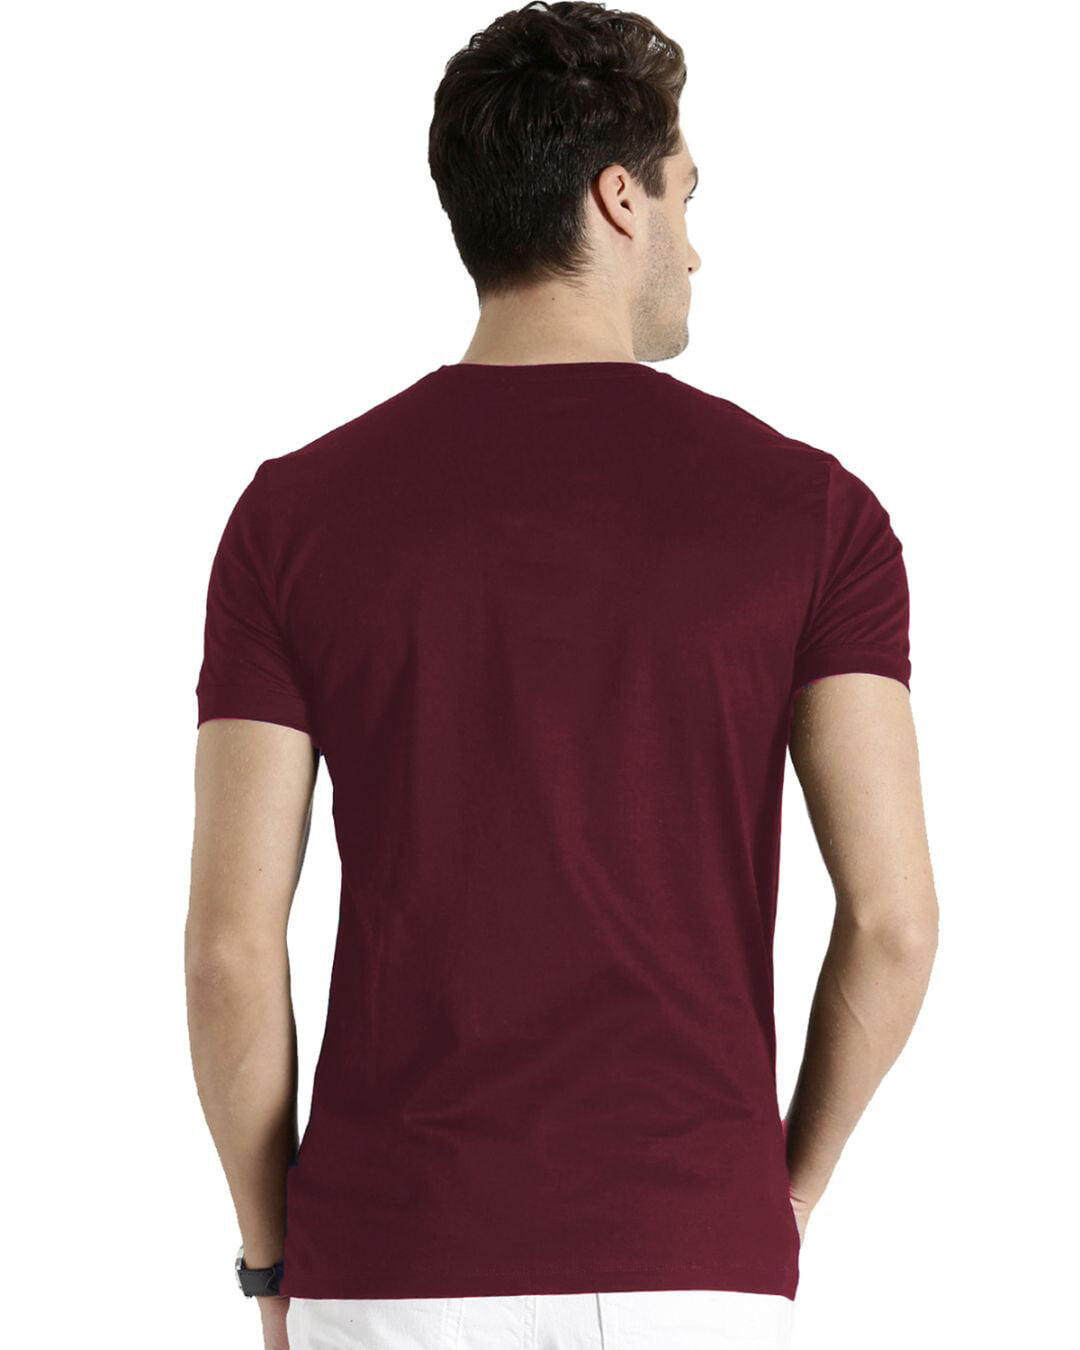 Shop Be Yourself Printed T-shirt for Men-Back